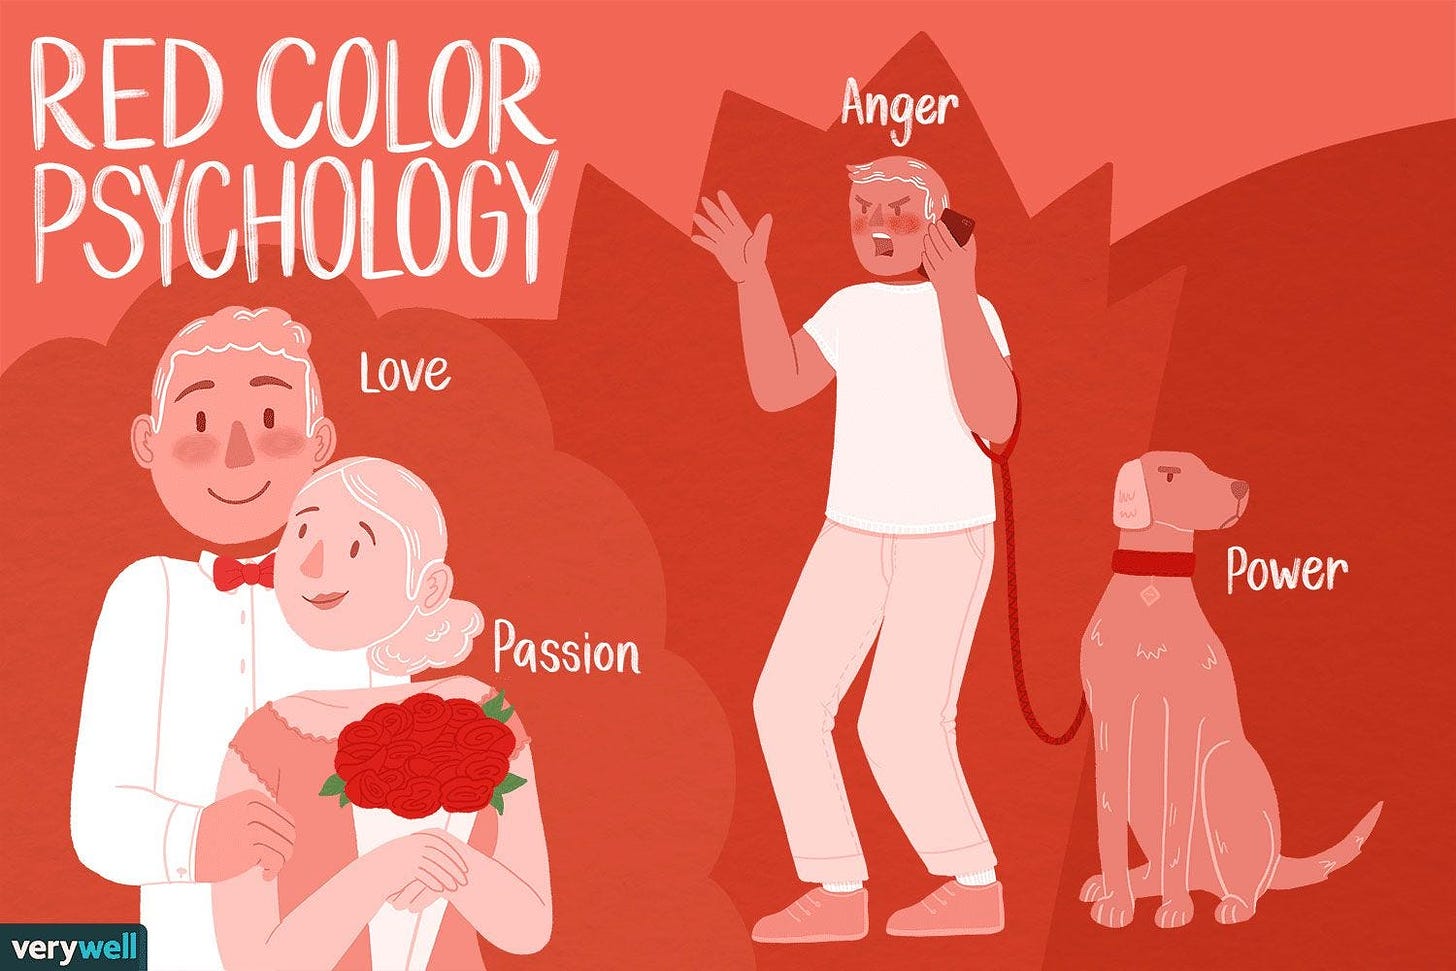 An illustration showing red color psychology as a symbol of love, passion, anger and power.